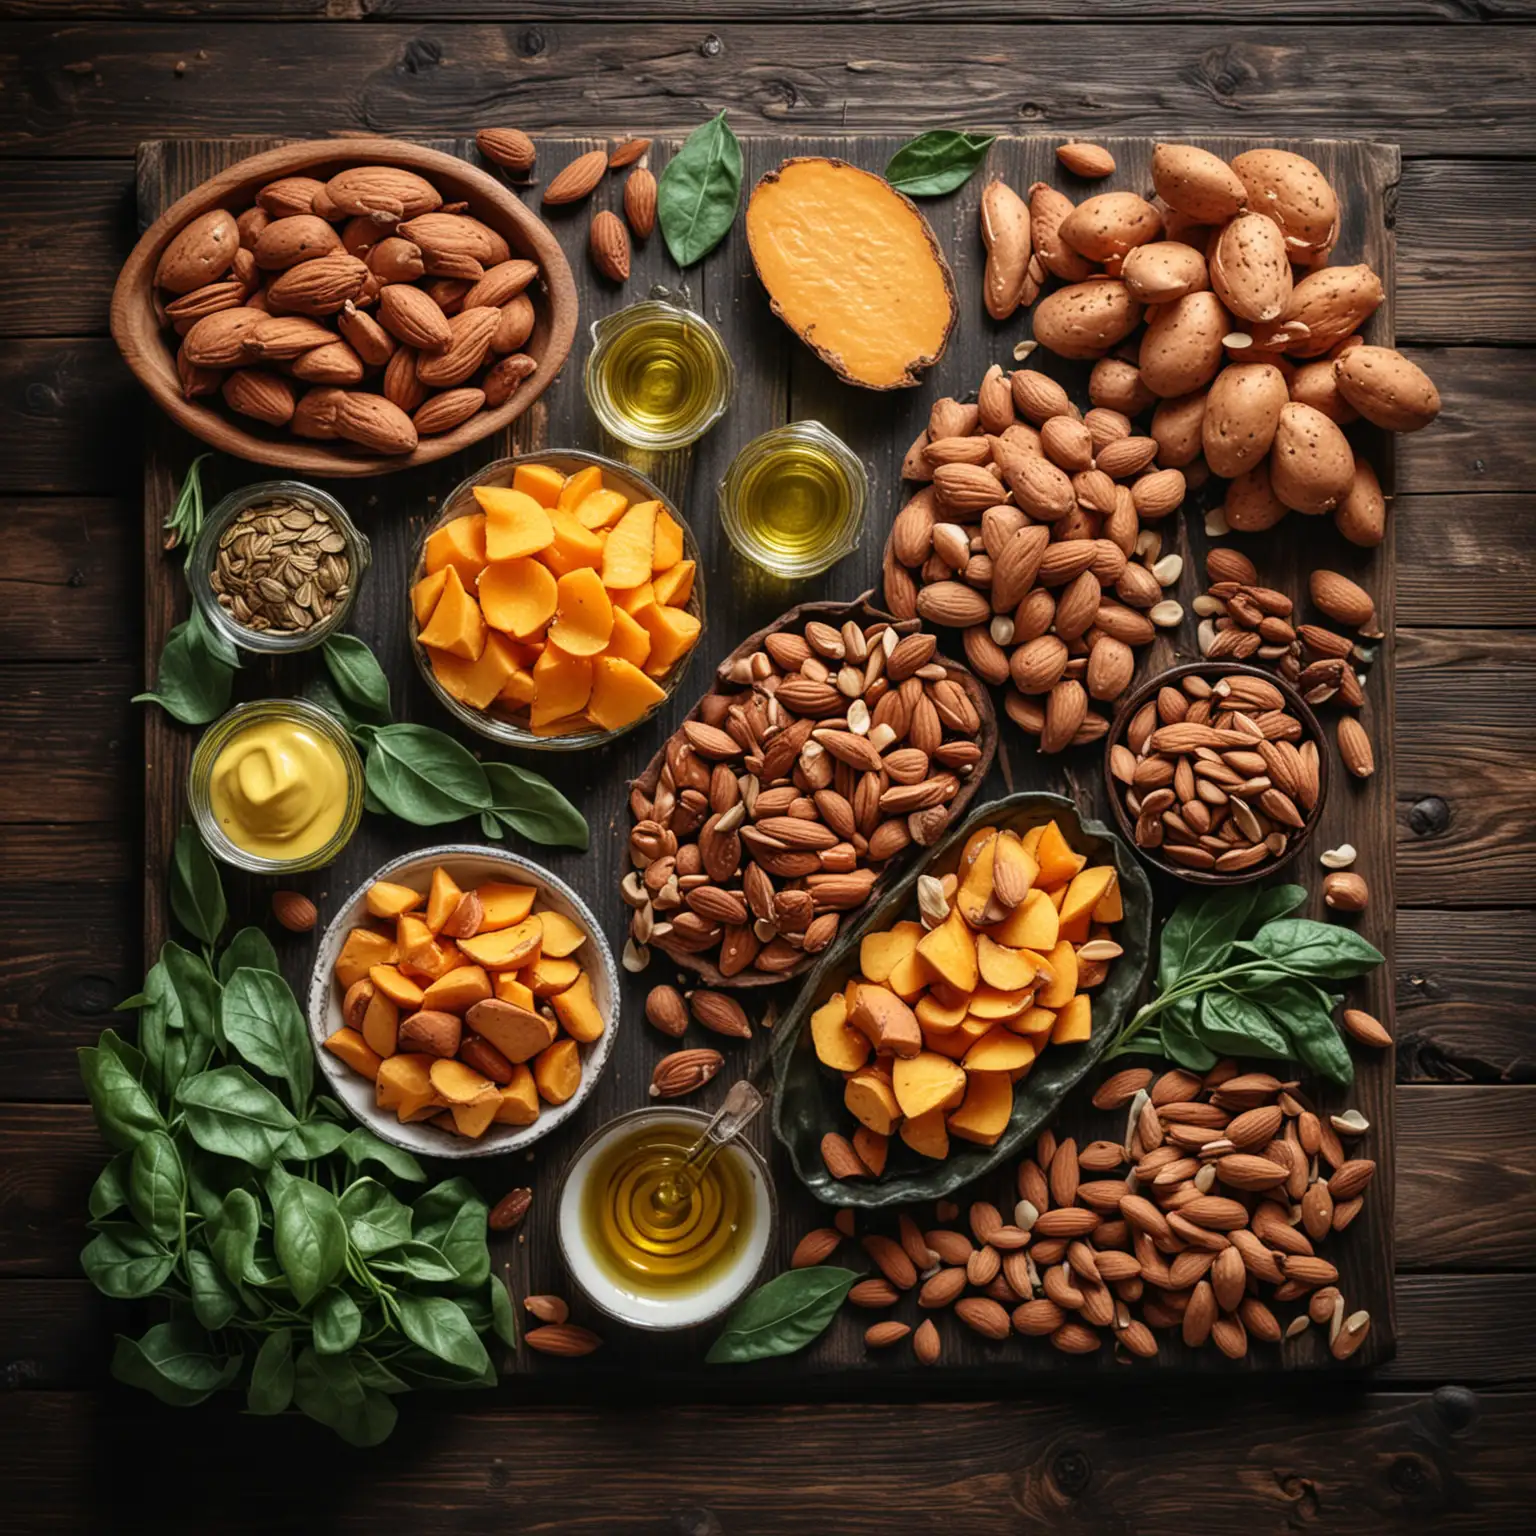 appetizing, attractive arrangement of foods on dark wooden table. foods to include: Almonds, spinach, plant oils (like grapeseed oil, sunflower oil, olive oil, and vegetable oil) and sweet potatoes